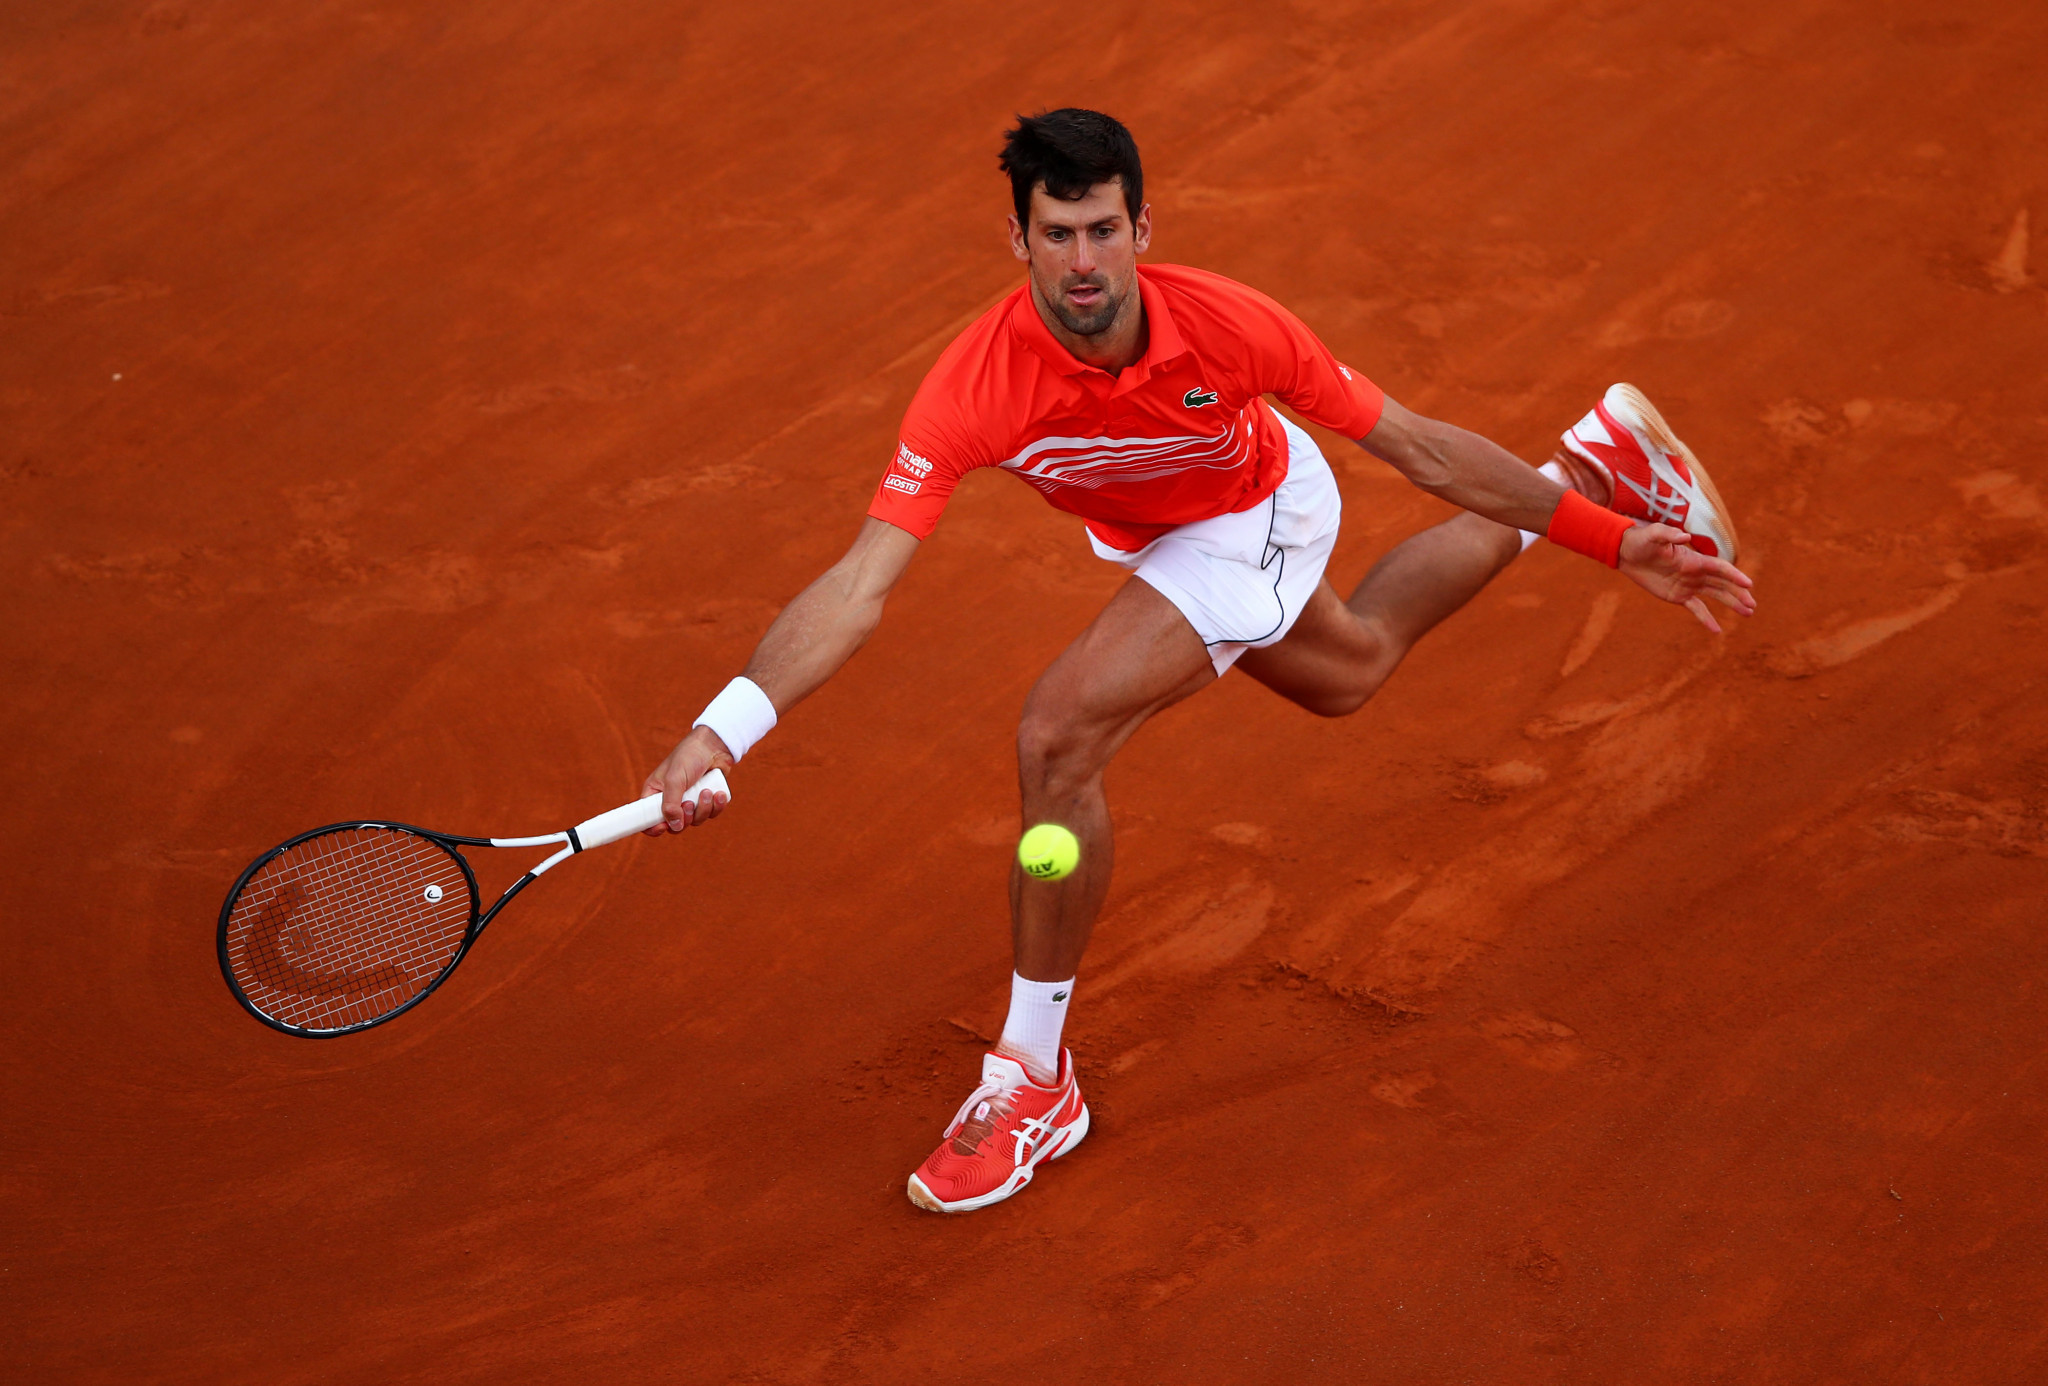 Serbia's Novak Djokovic is aiming for a fourth consecutive Grand Slam victory at the French Open ©Getty Images